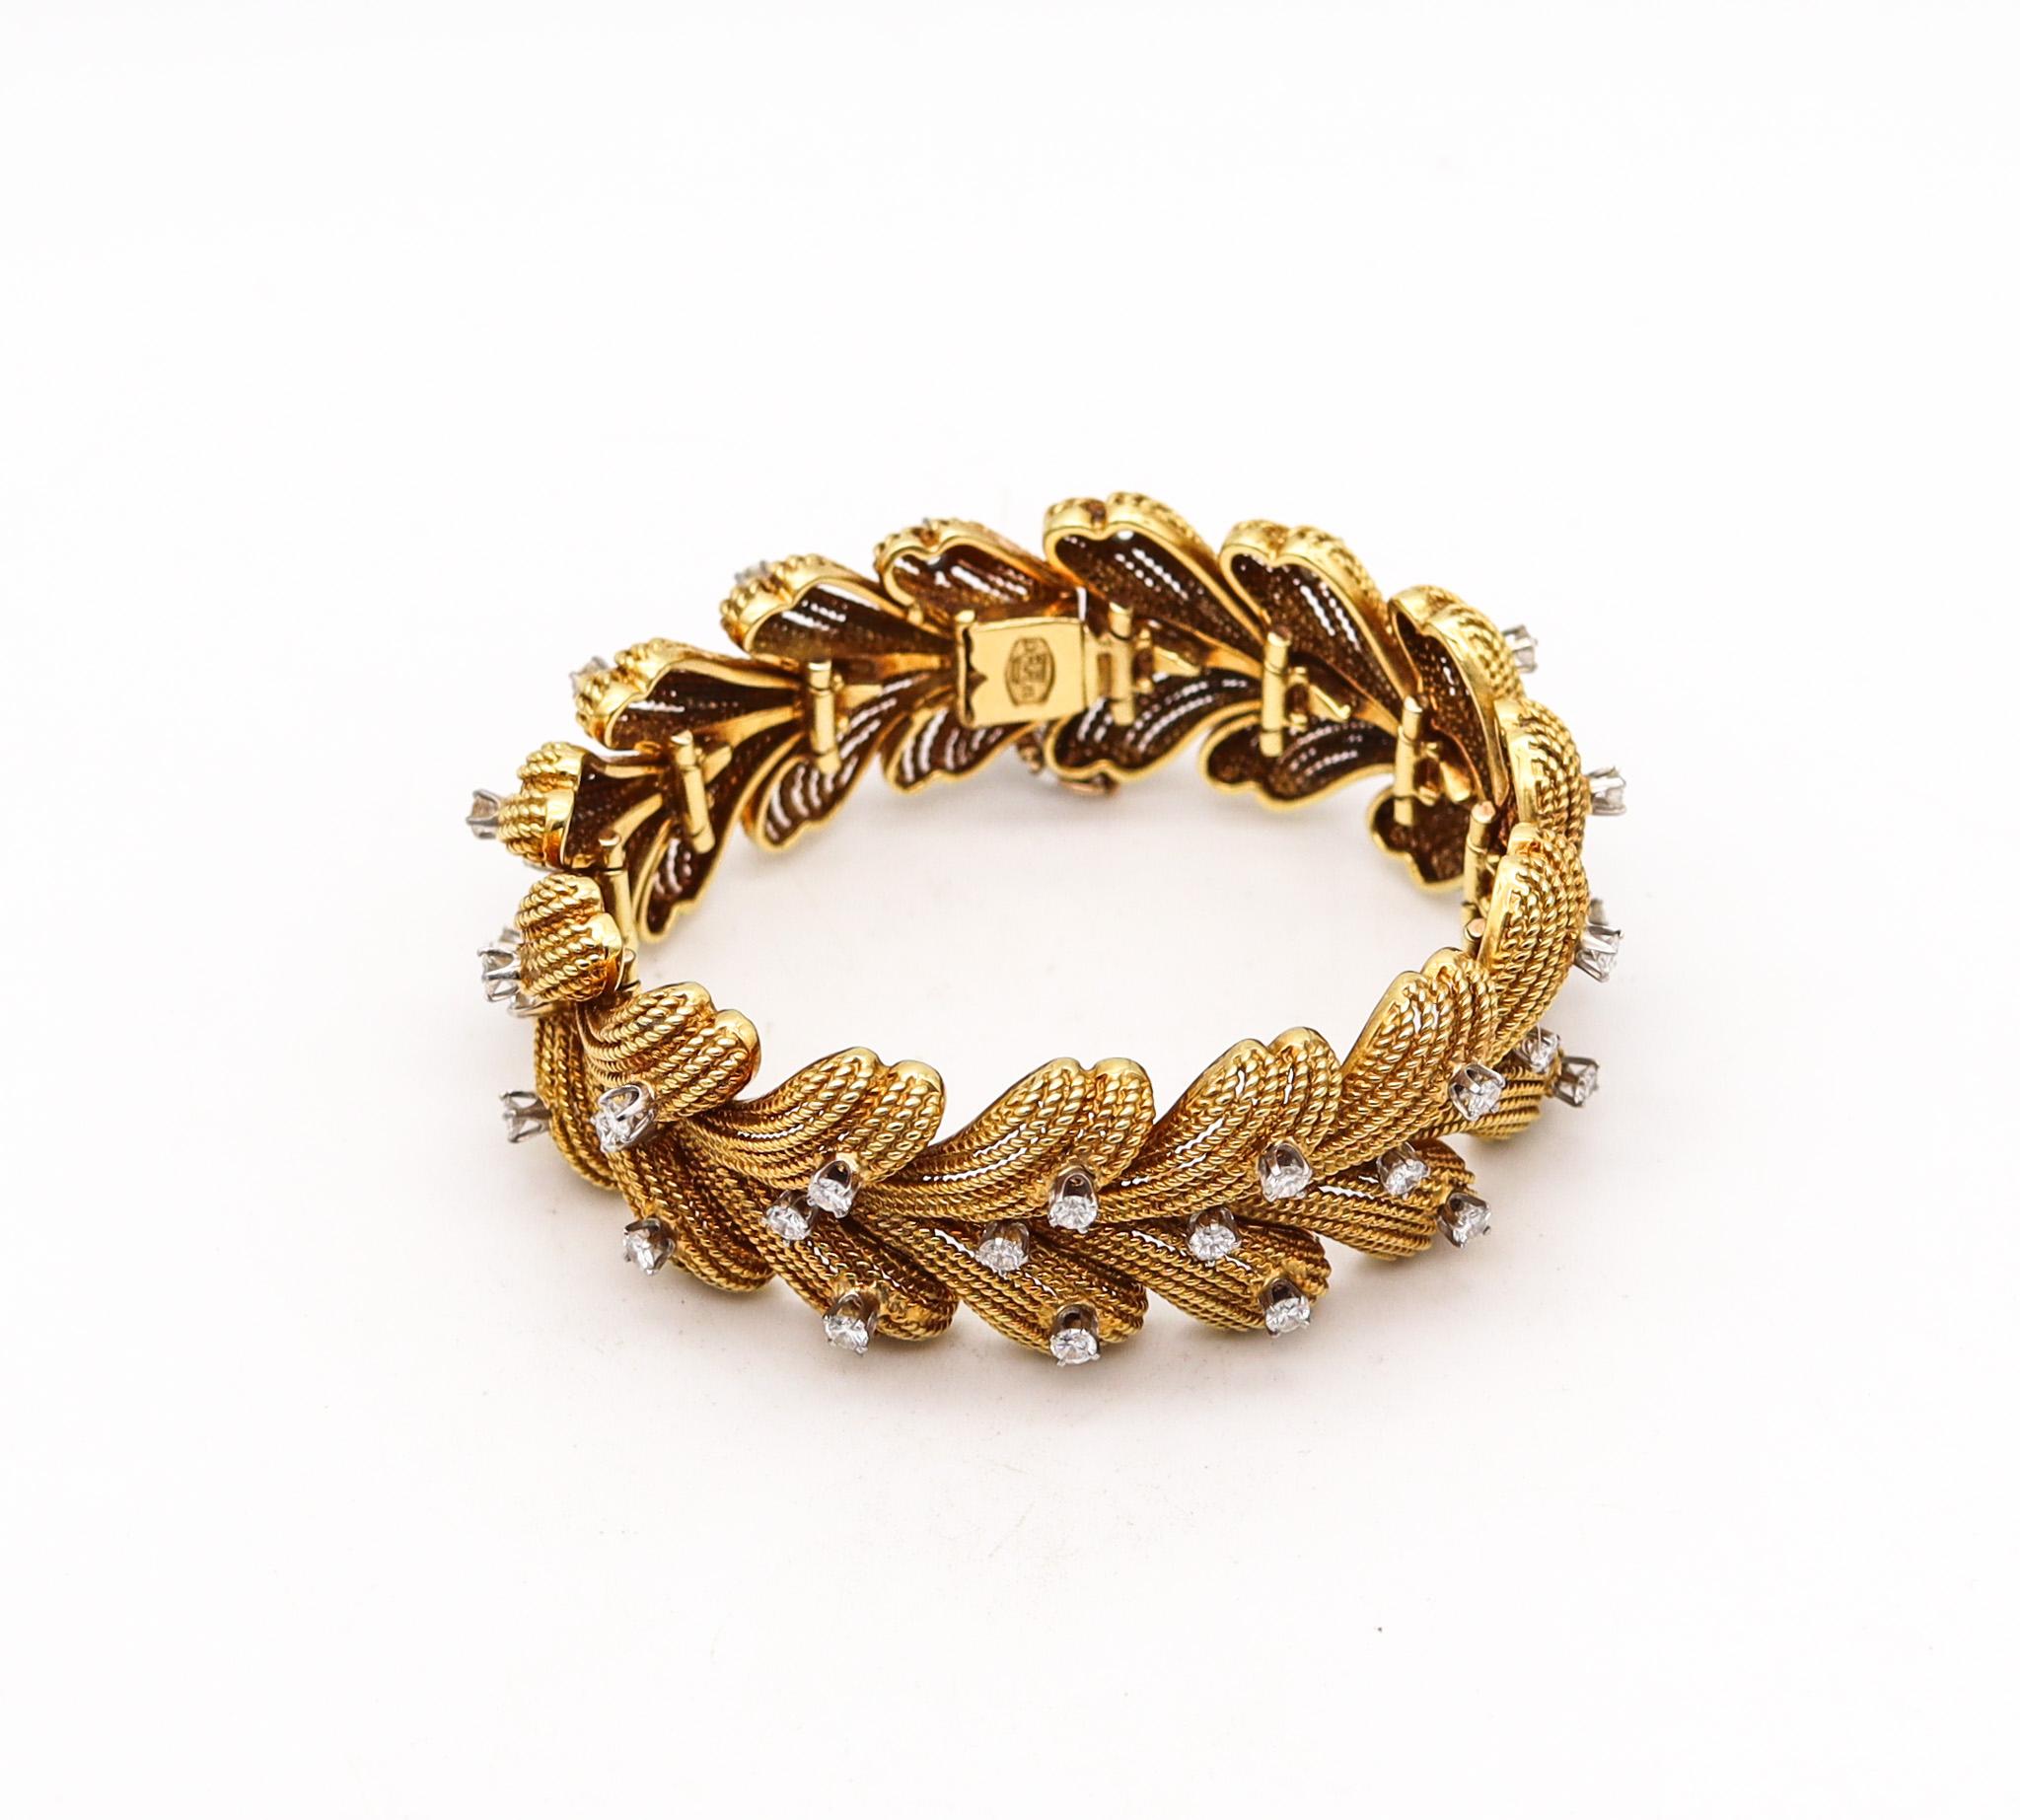 Statement diamonds bracelet designed by La Triomphe.

Beautiful retro modern bracelet, created in Astoria New York by La Triomphe, back in the early 1970. This stunning piece was carefully crafted with twisted wires made up in solid rich yellow gold